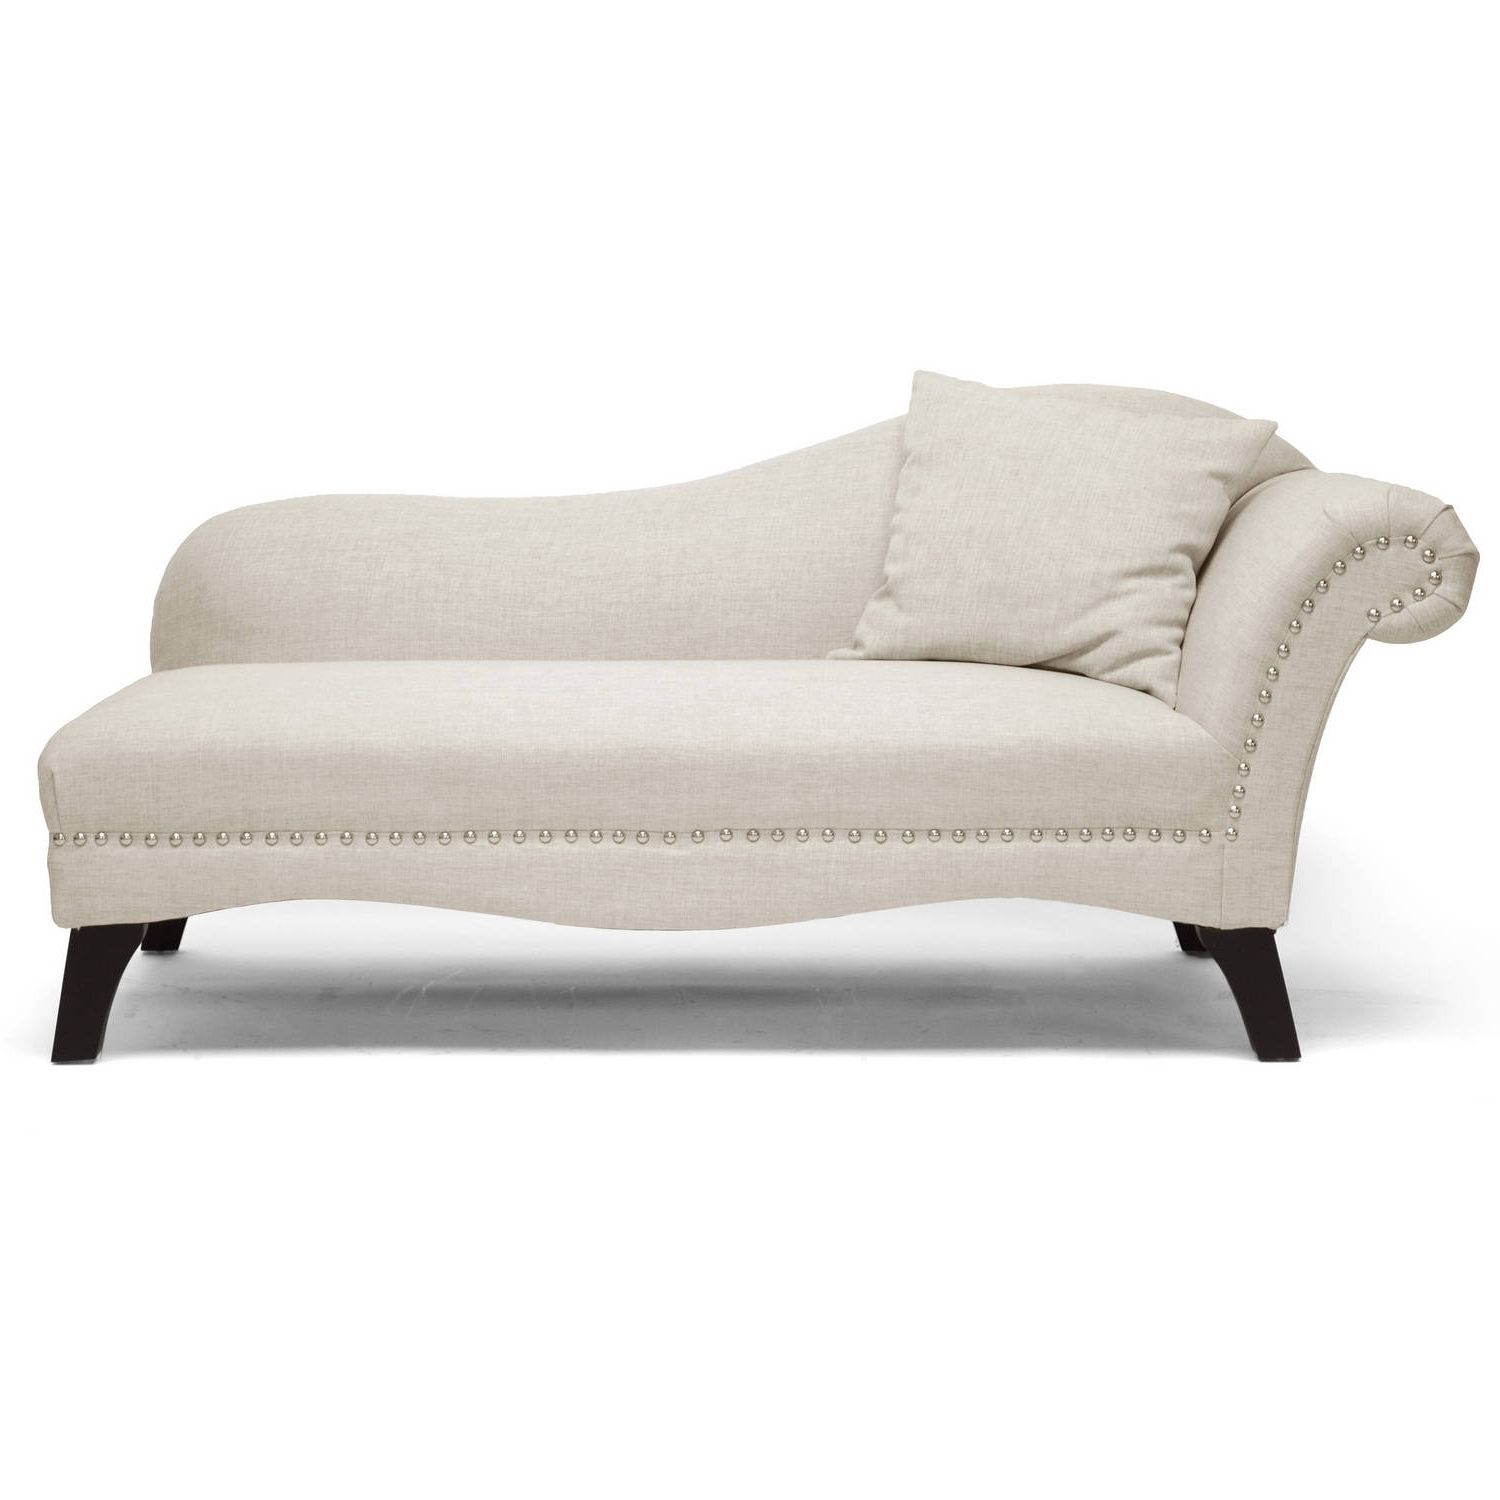 Well Known Chaise Lounge Chairs With Two Arms Inside Chaise Lounges – Walmart (View 11 of 15)